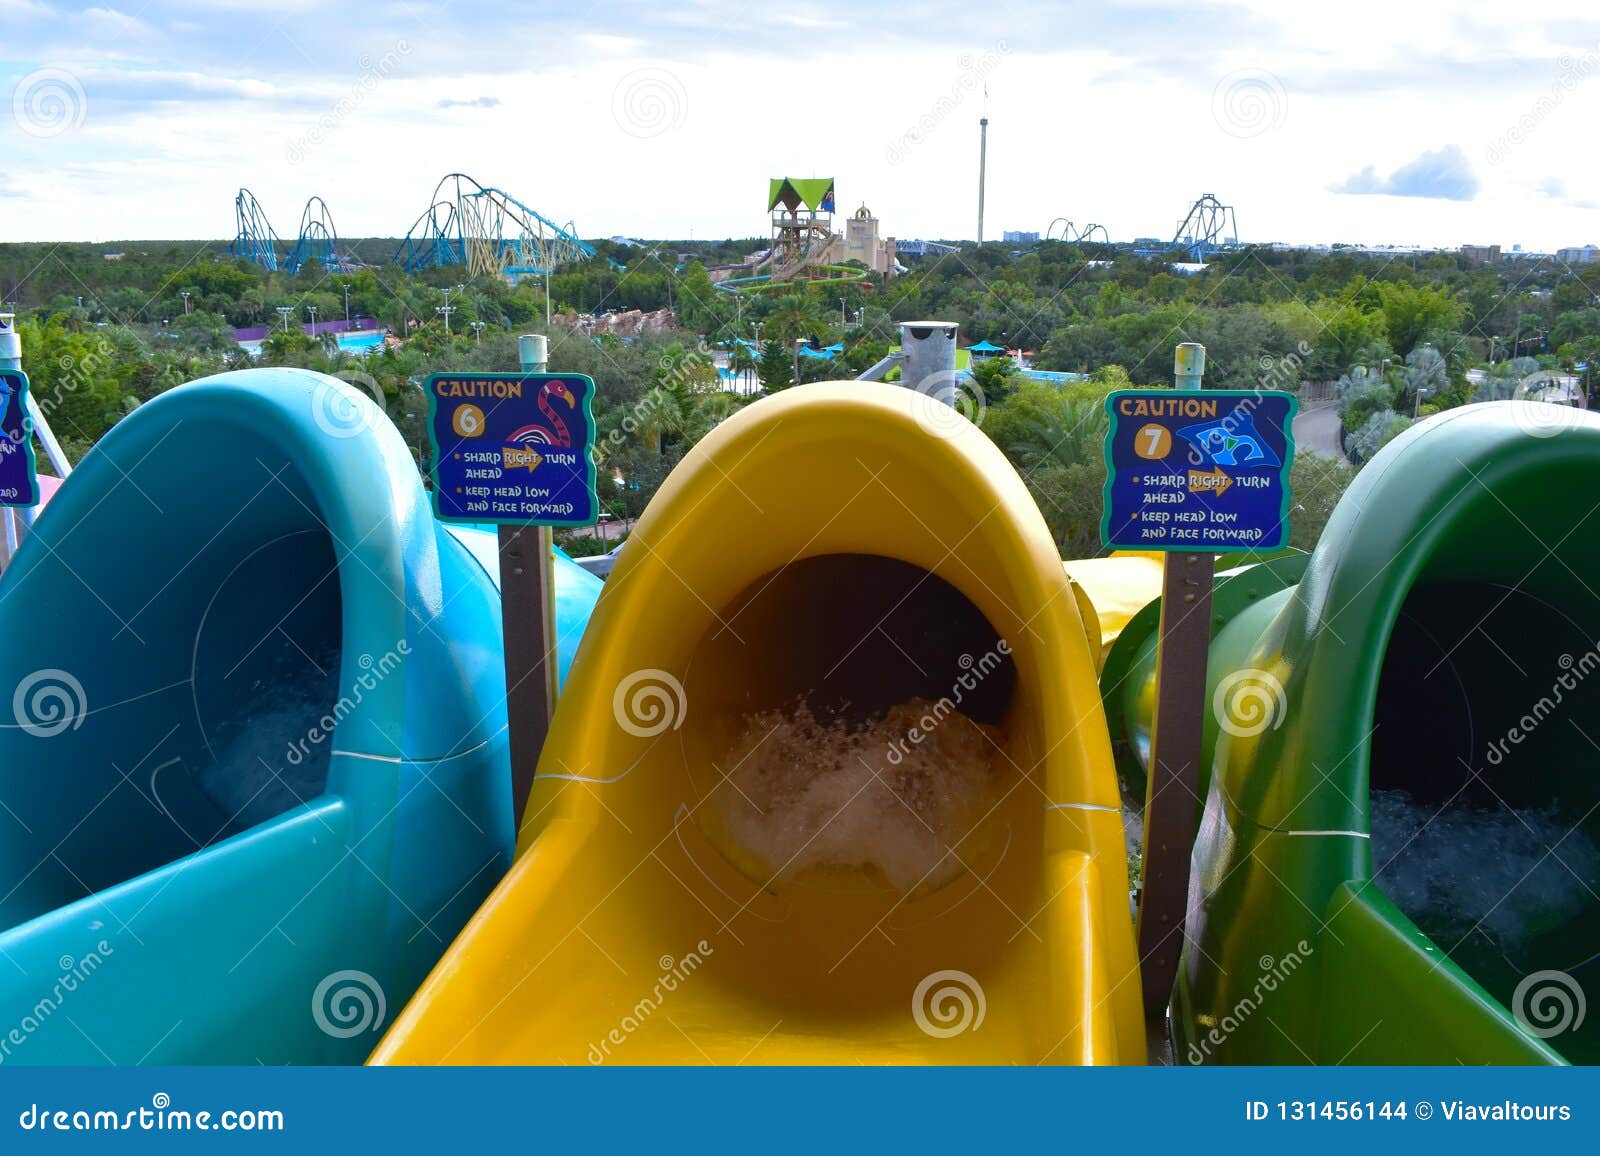 Colorful Slides On Panoramic View Of Seaworld And Aquatica In International Drive Area Editorial Stock Image Image Of Lazy Area